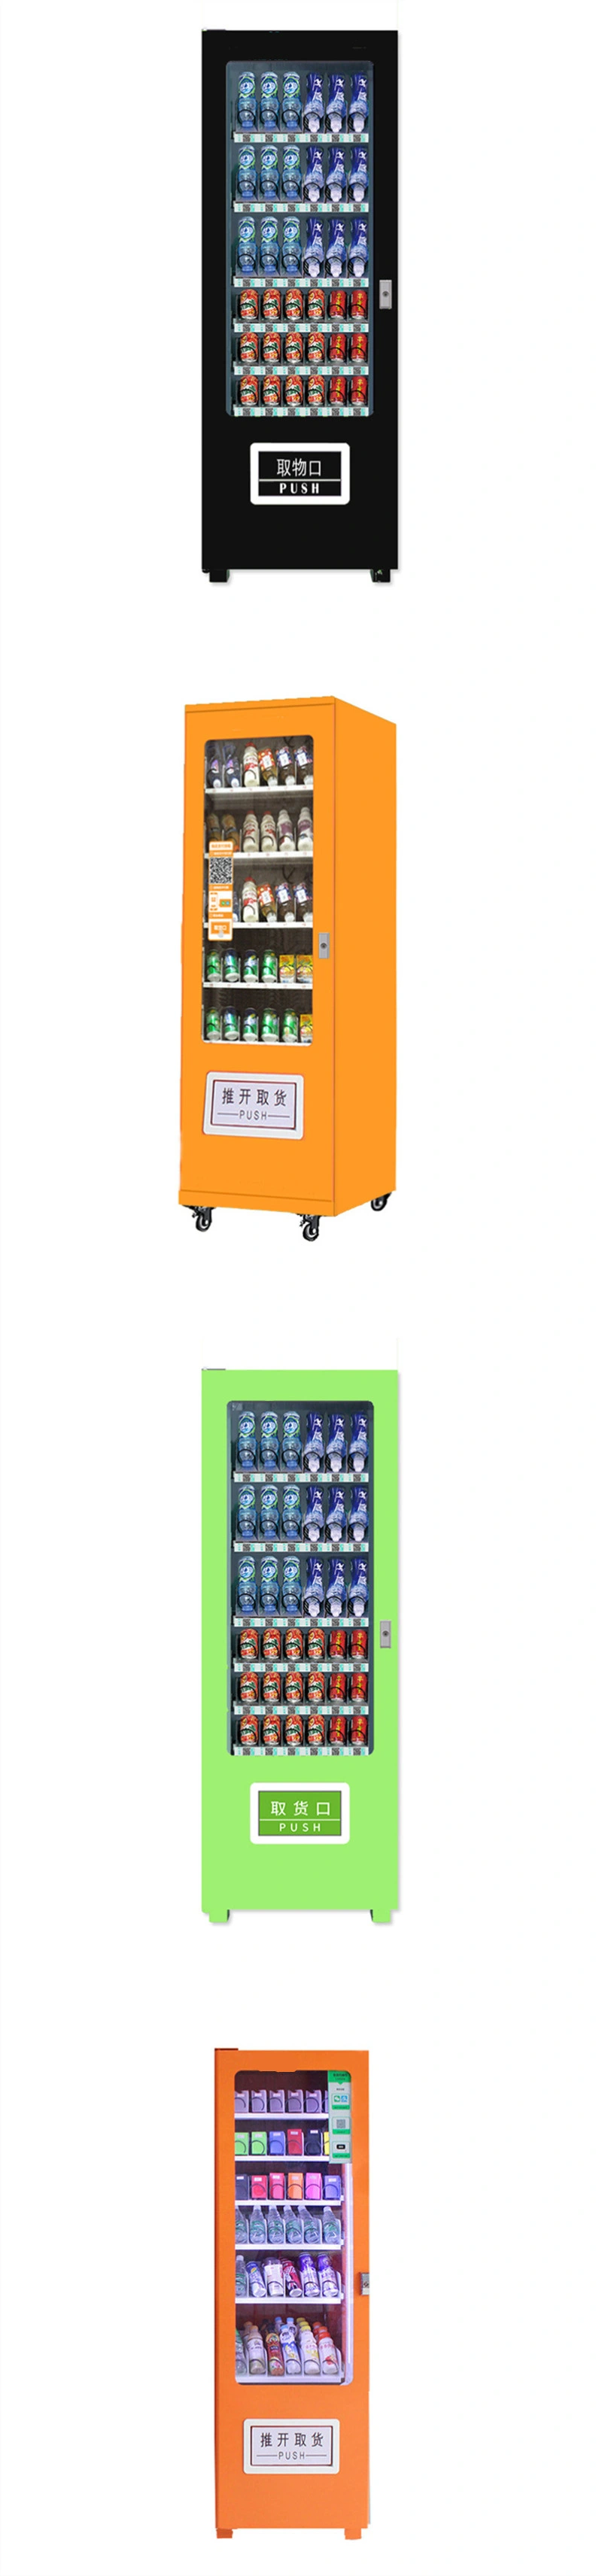 Small Vending Machine Smart Ice Cream Vendor Machine for Sell Snack and Beverage Customizabled